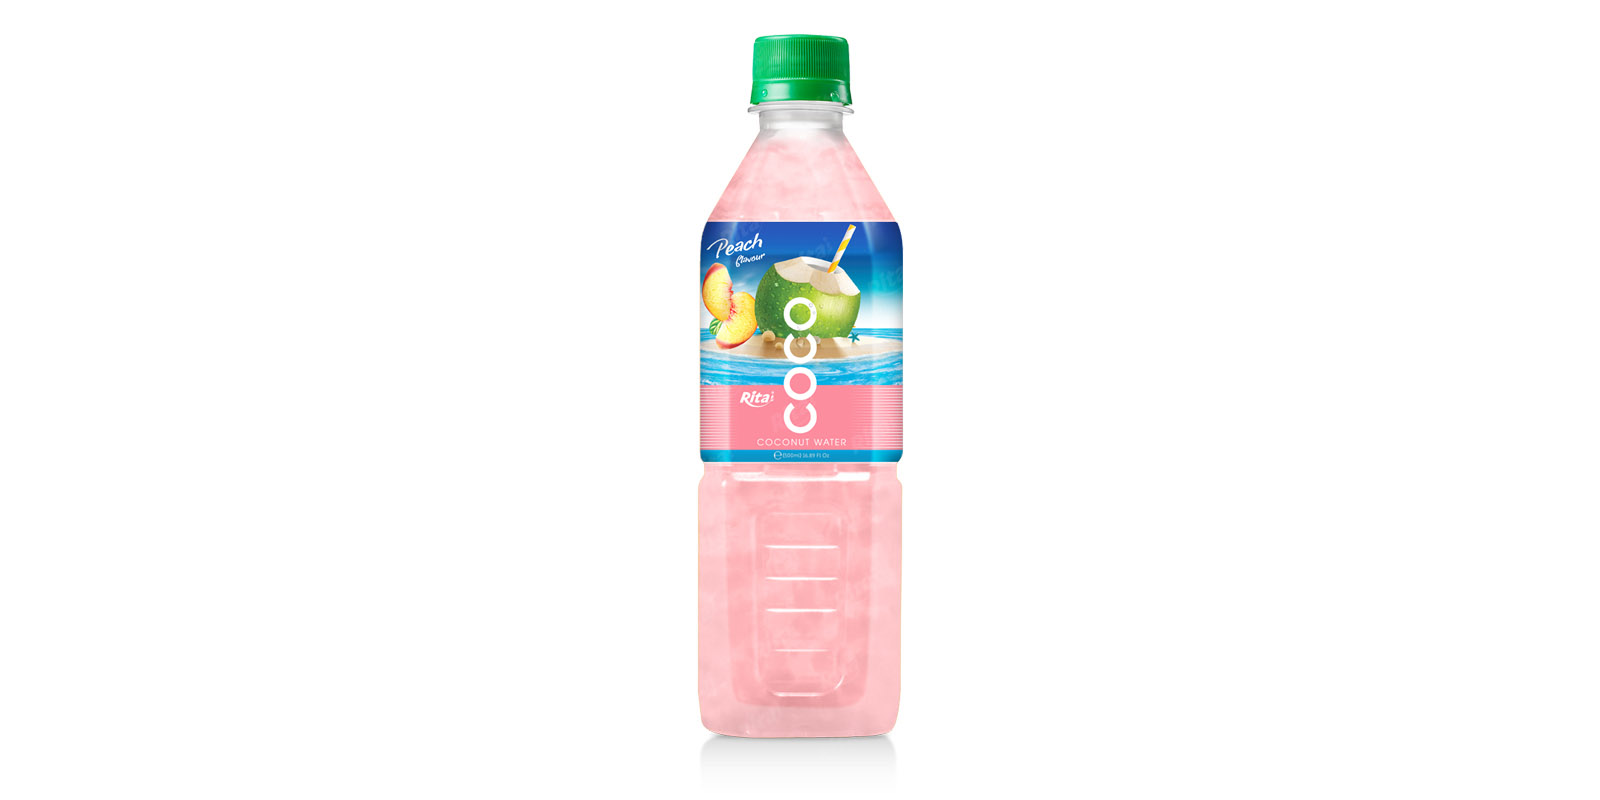 Coconut water with peach flavor  500ml Pet bottle 